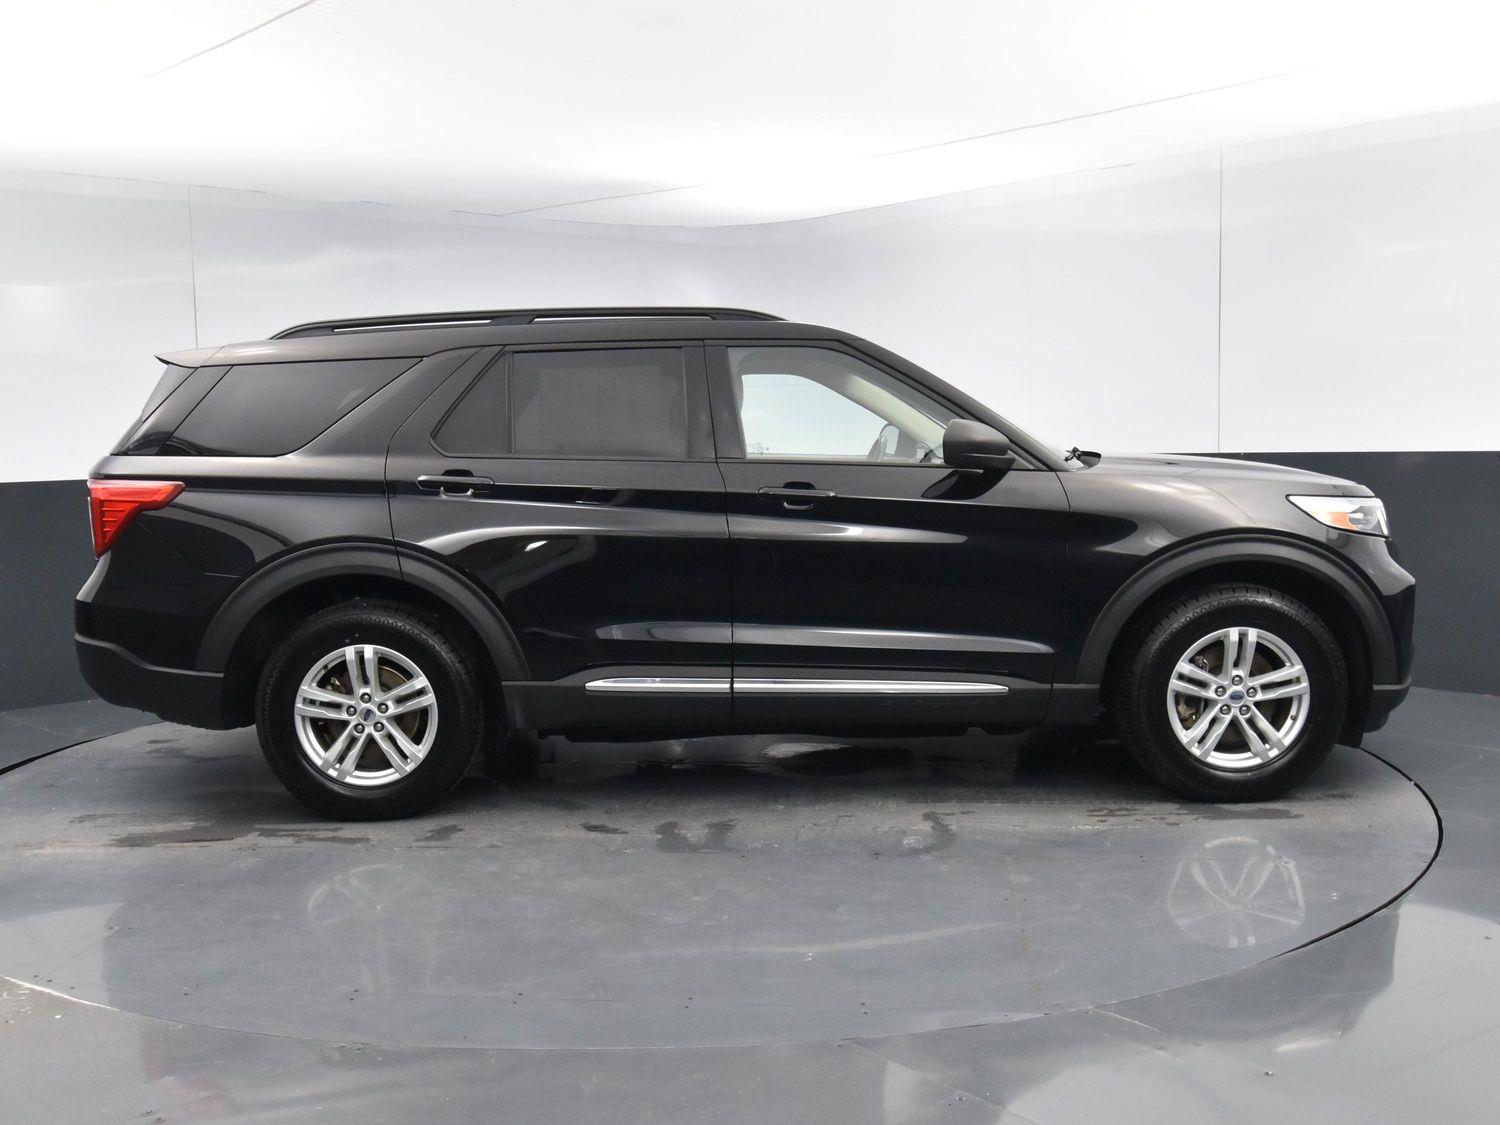 Used 2022 Ford Explorer XLT SUV for sale in Grand Island NE